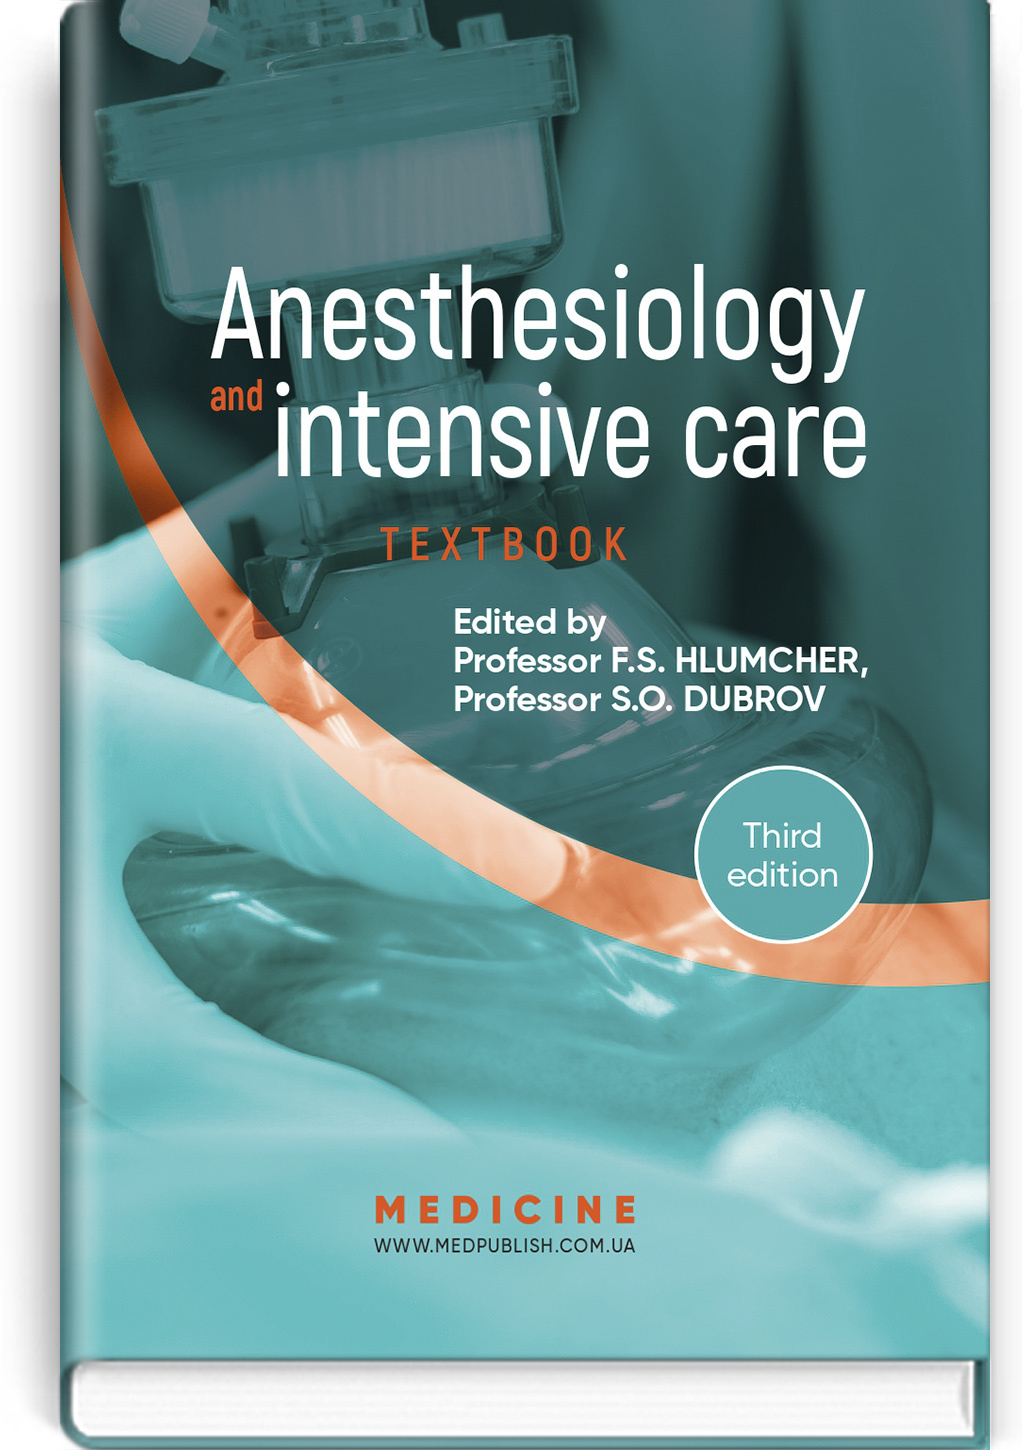 Anesthesiology and intensive care: textbook